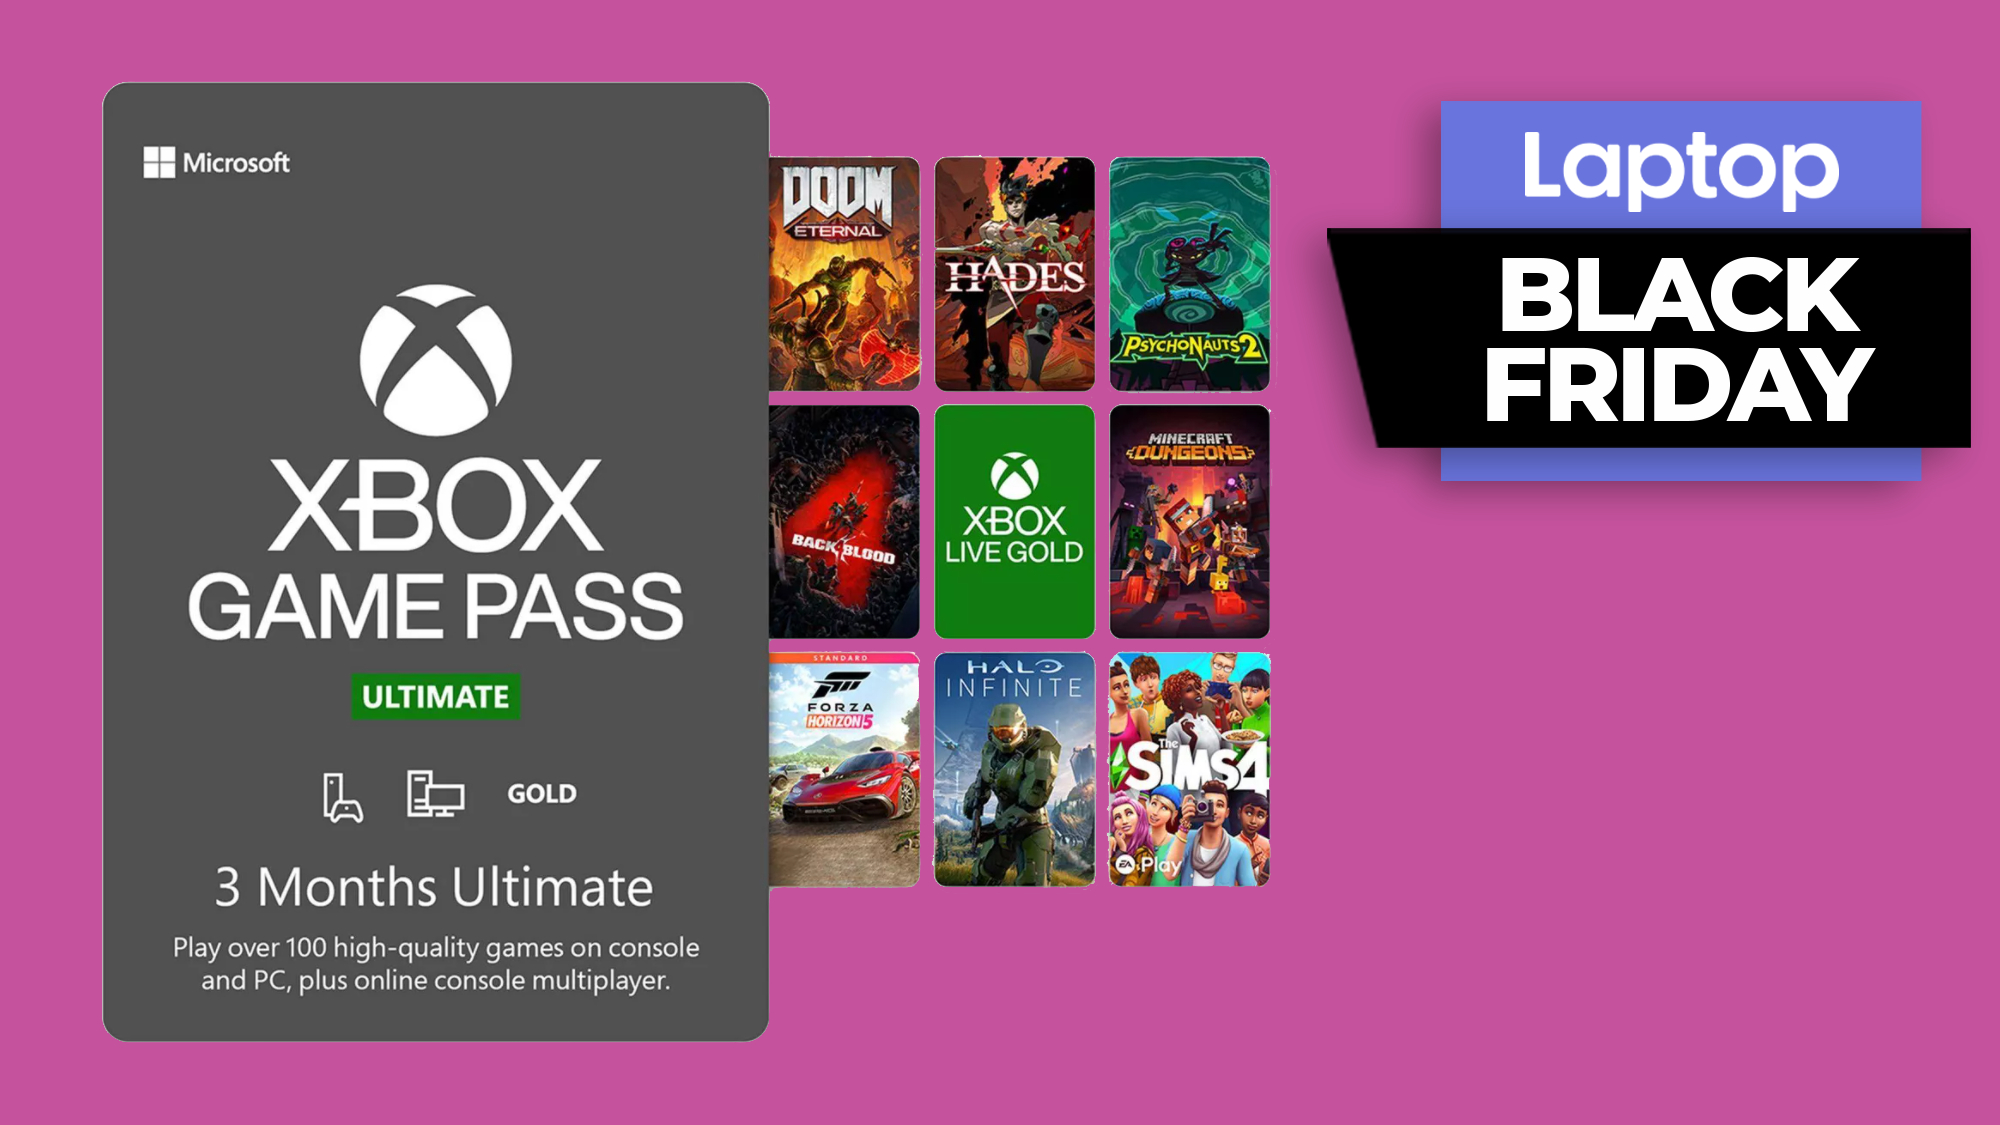 Xbox Game Pass Ultimate Is the Best Deal in Gaming Right Now